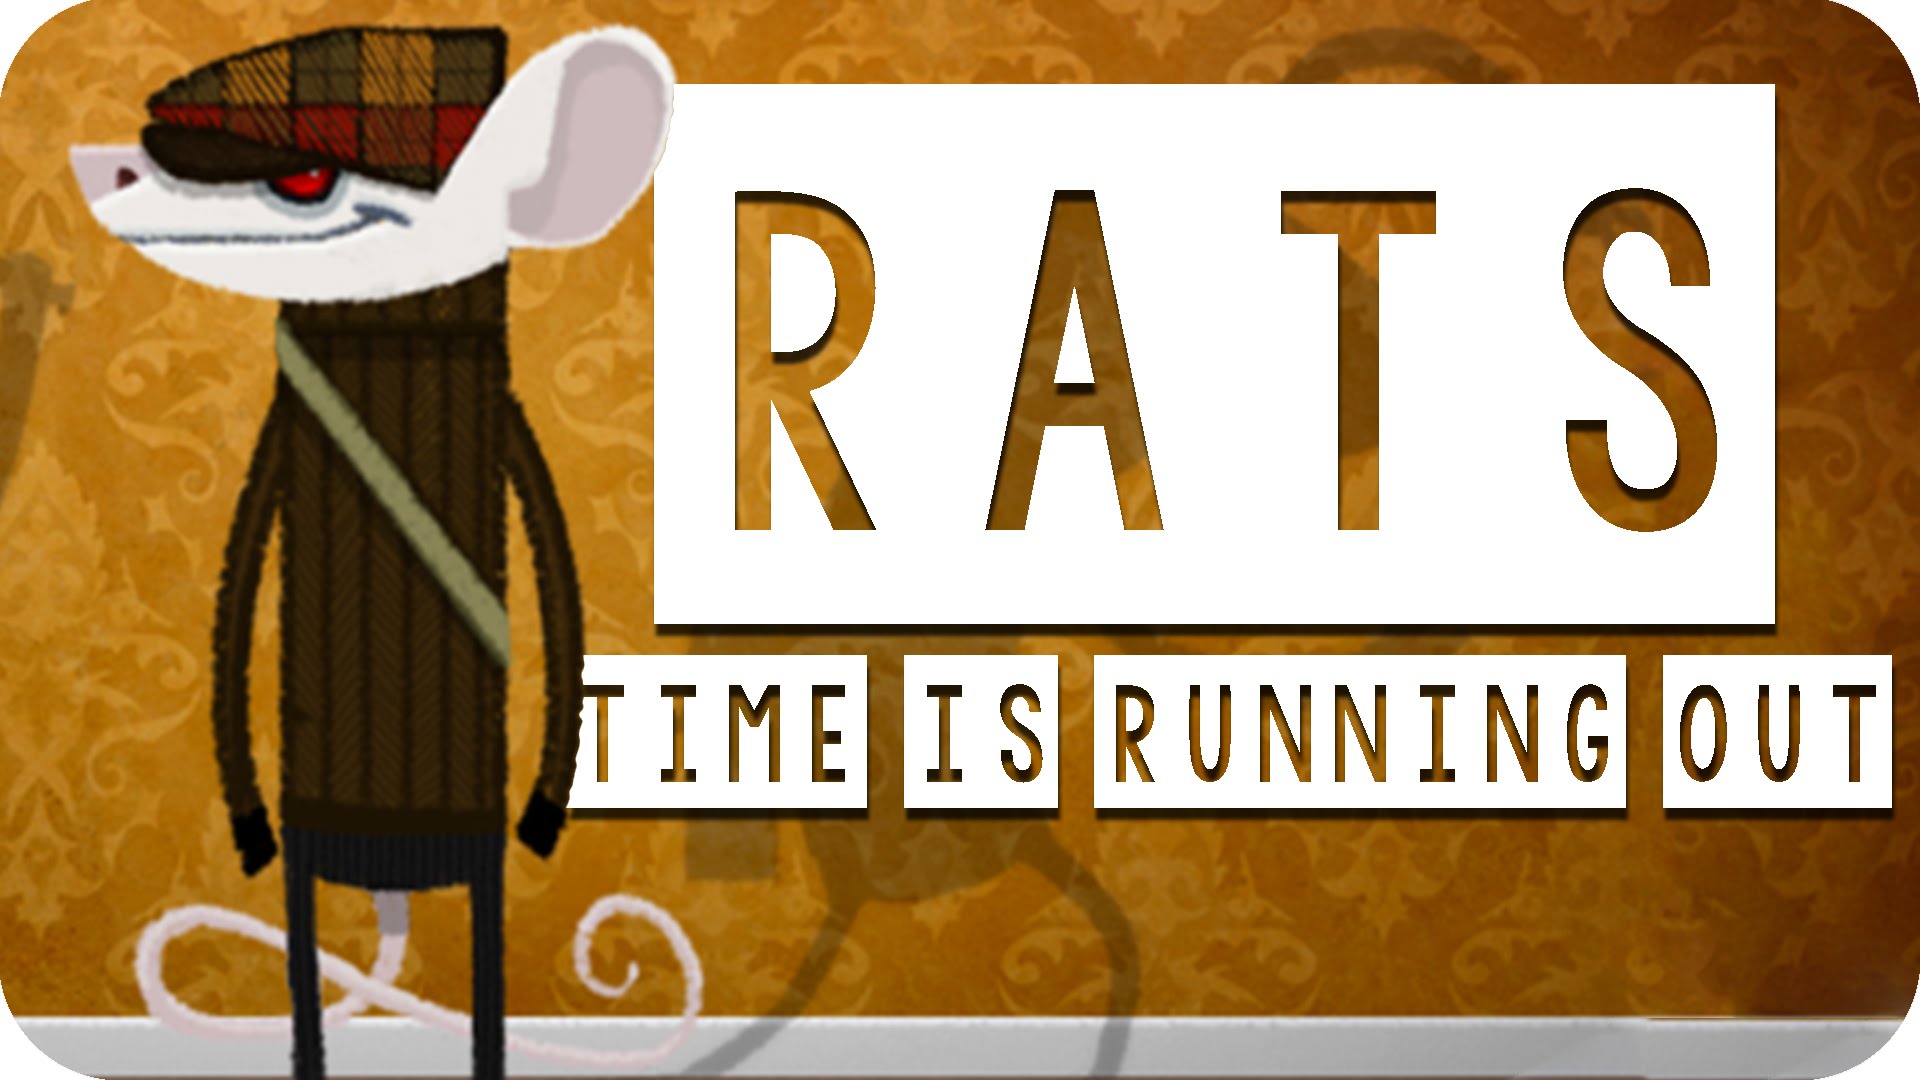 Rat time игра. Rats - time is Running out!. Rats time is Running. Time is Running out обои.